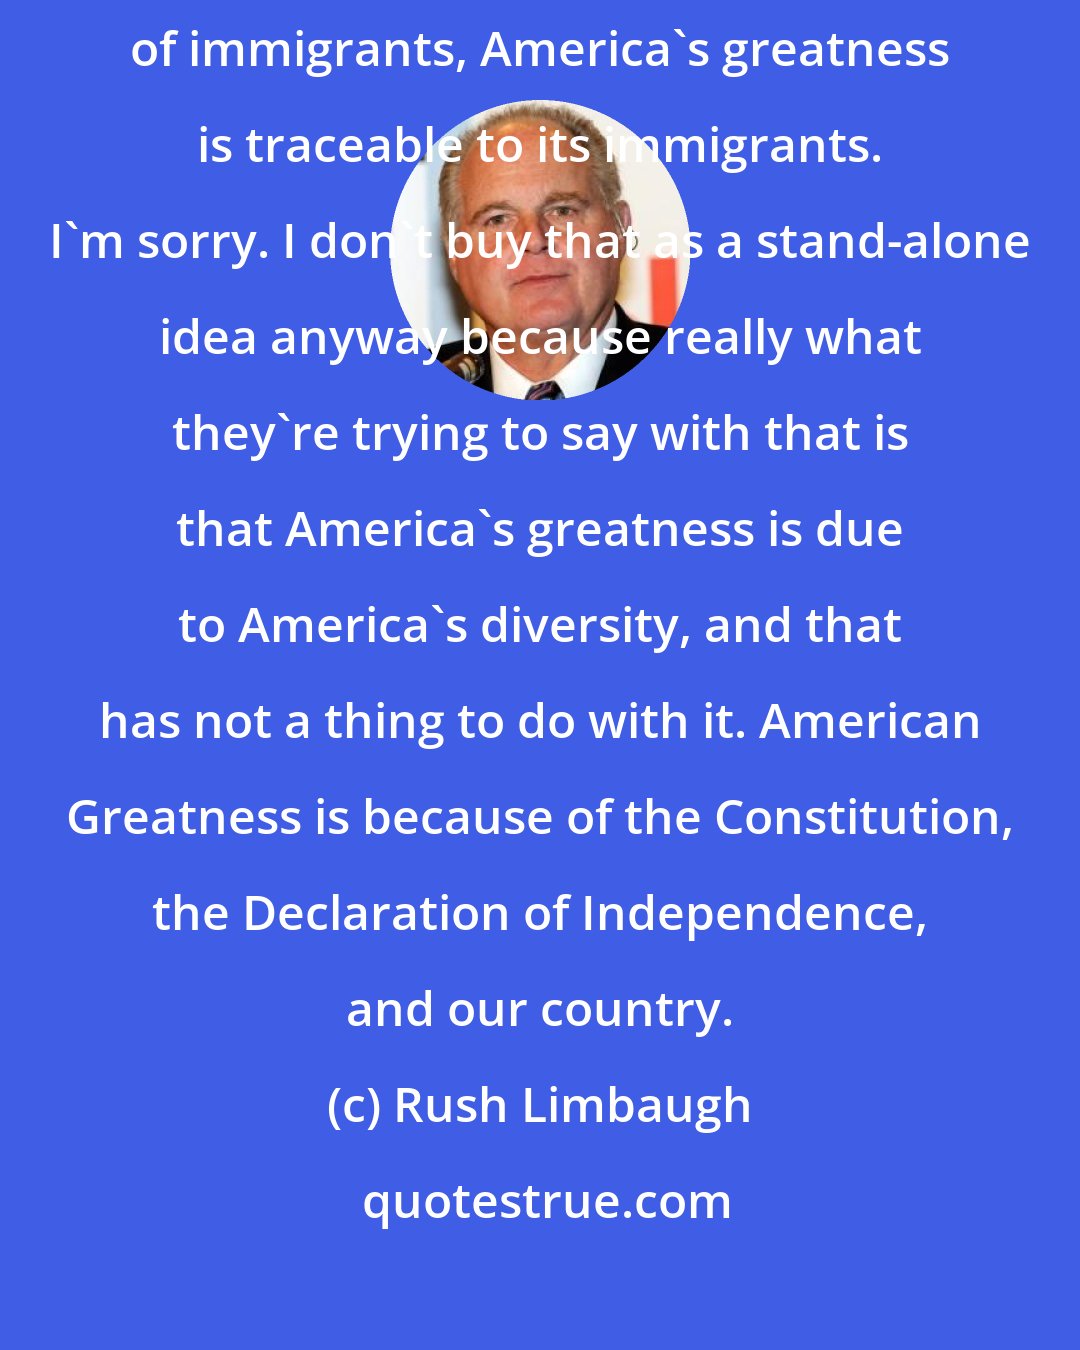 Rush Limbaugh: The left think they've got a monopoly on this silly idea that we are a nation of immigrants, America's greatness is traceable to its immigrants. I'm sorry. I don't buy that as a stand-alone idea anyway because really what they're trying to say with that is that America's greatness is due to America's diversity, and that has not a thing to do with it. American Greatness is because of the Constitution, the Declaration of Independence, and our country.